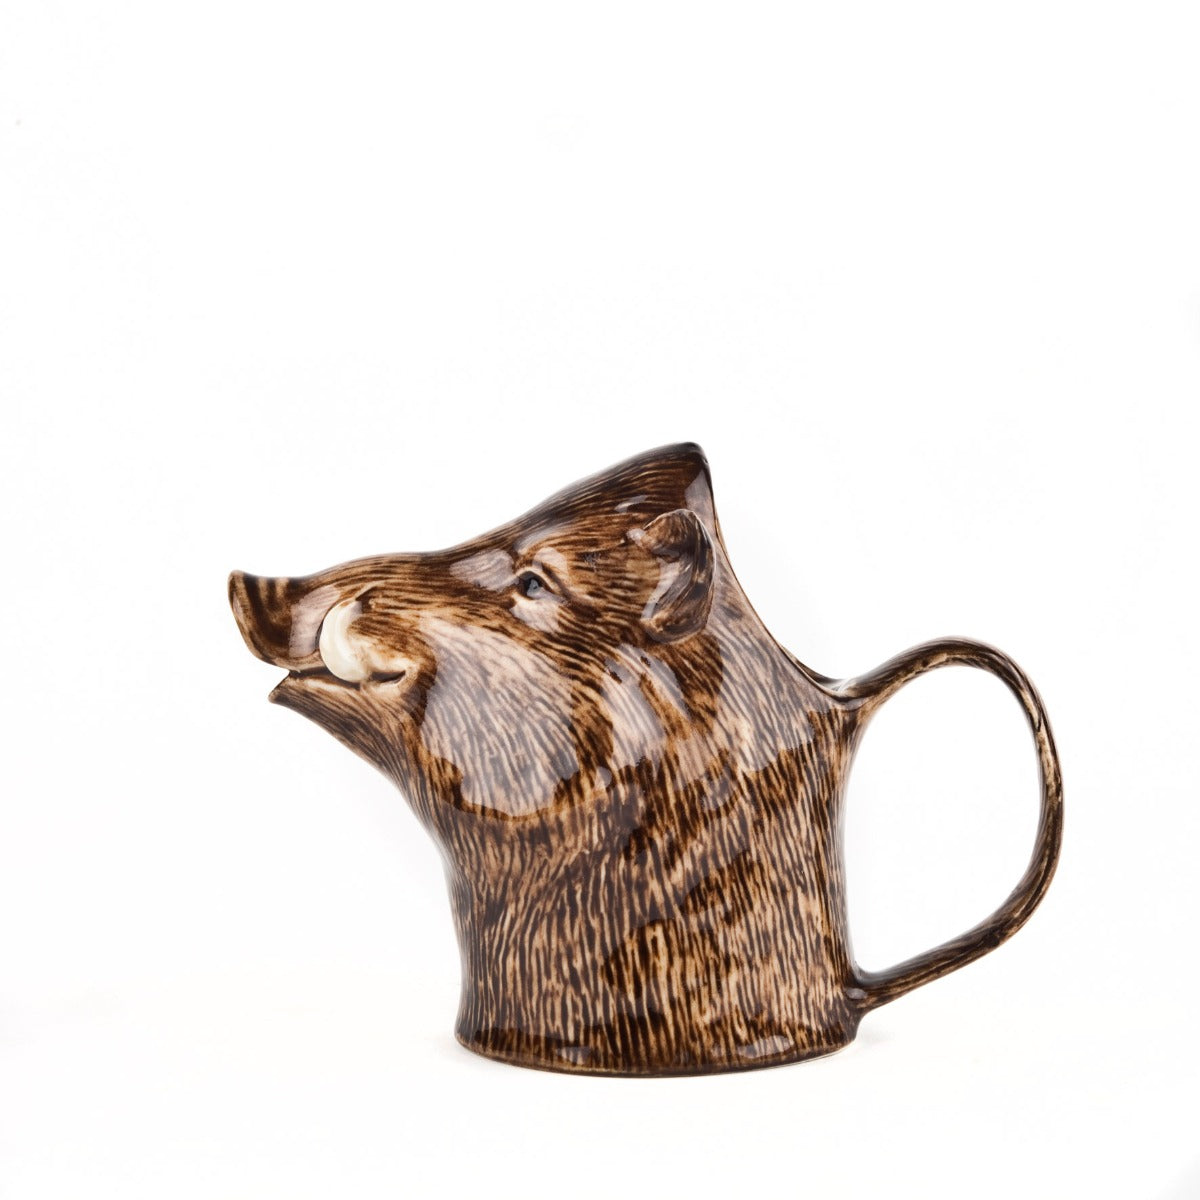 Wild Boar Jug- 3 sizes available